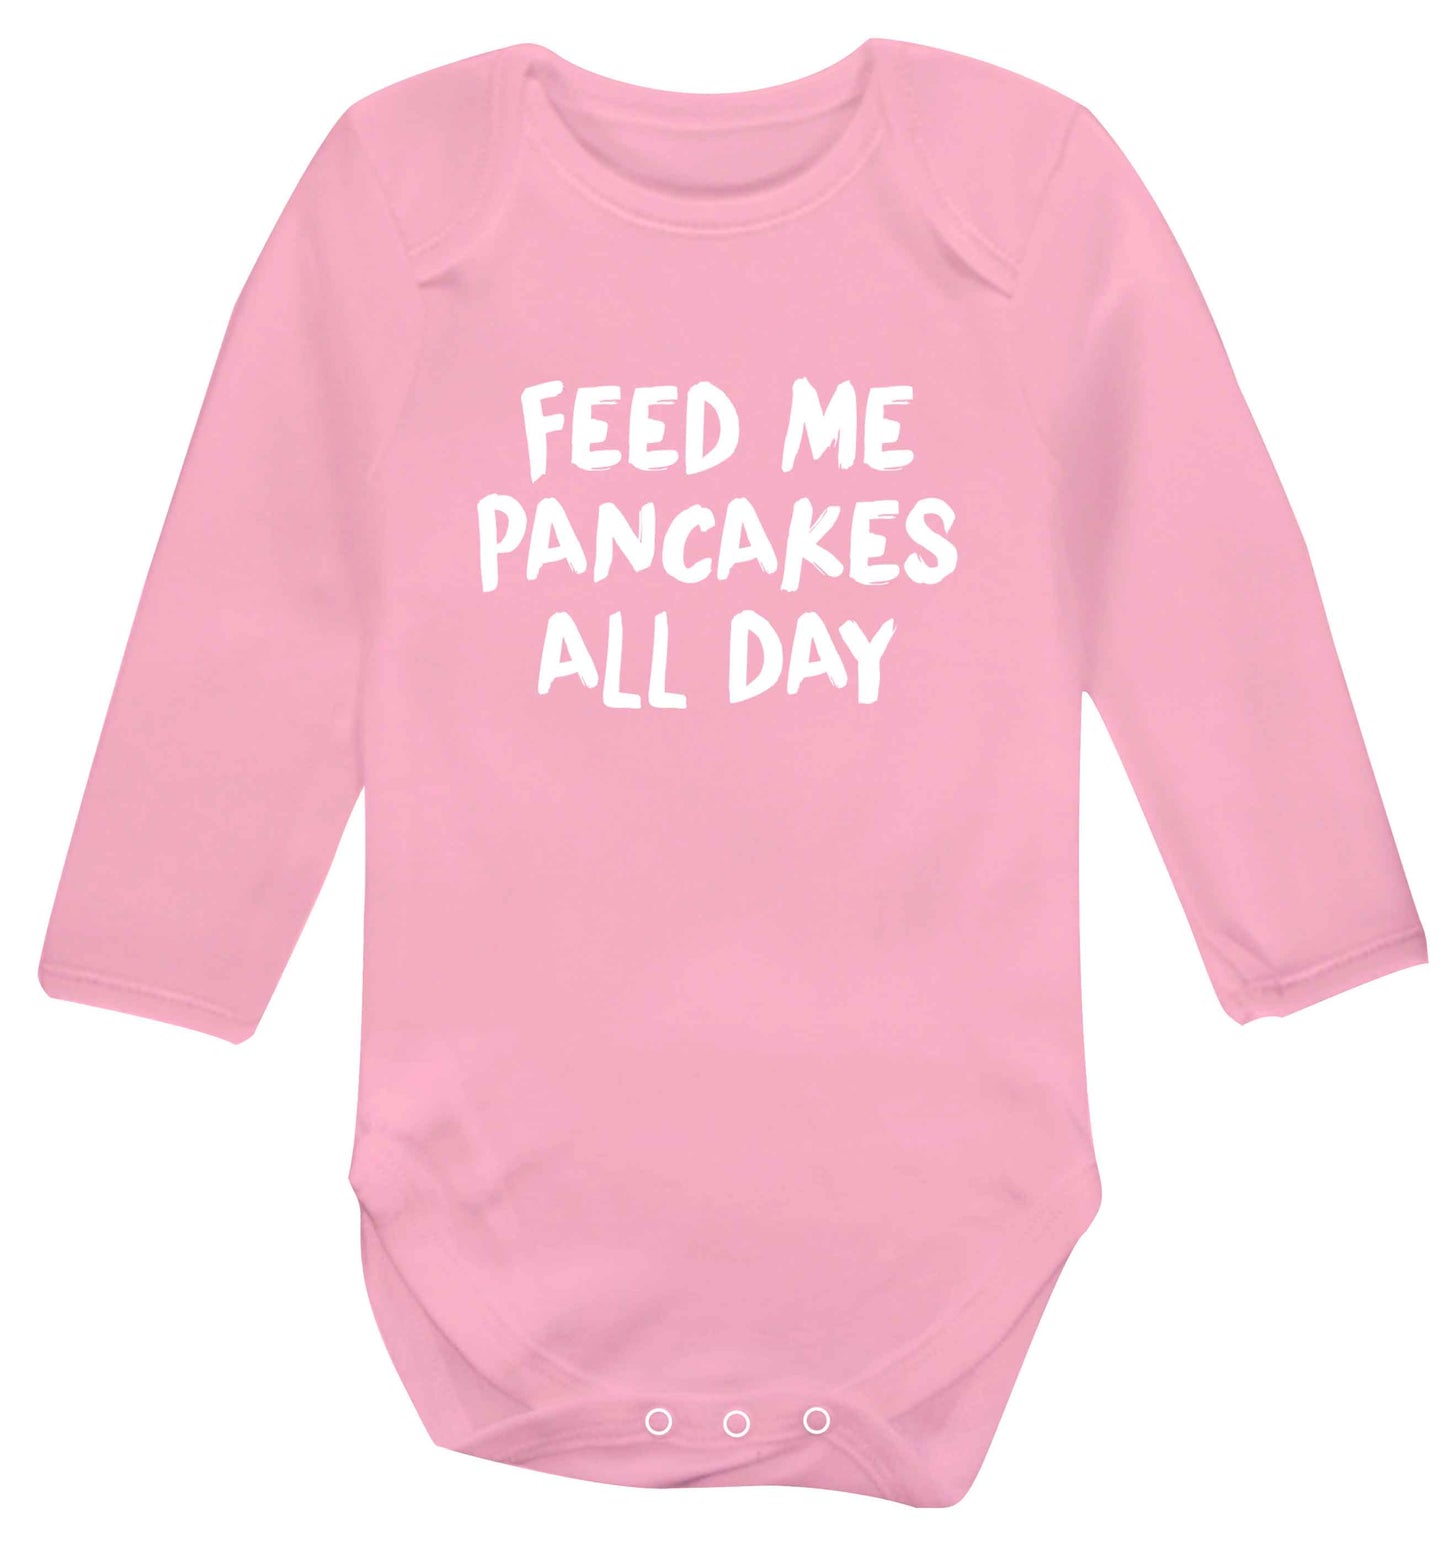 Feed me pancakes all day baby vest long sleeved pale pink 6-12 months